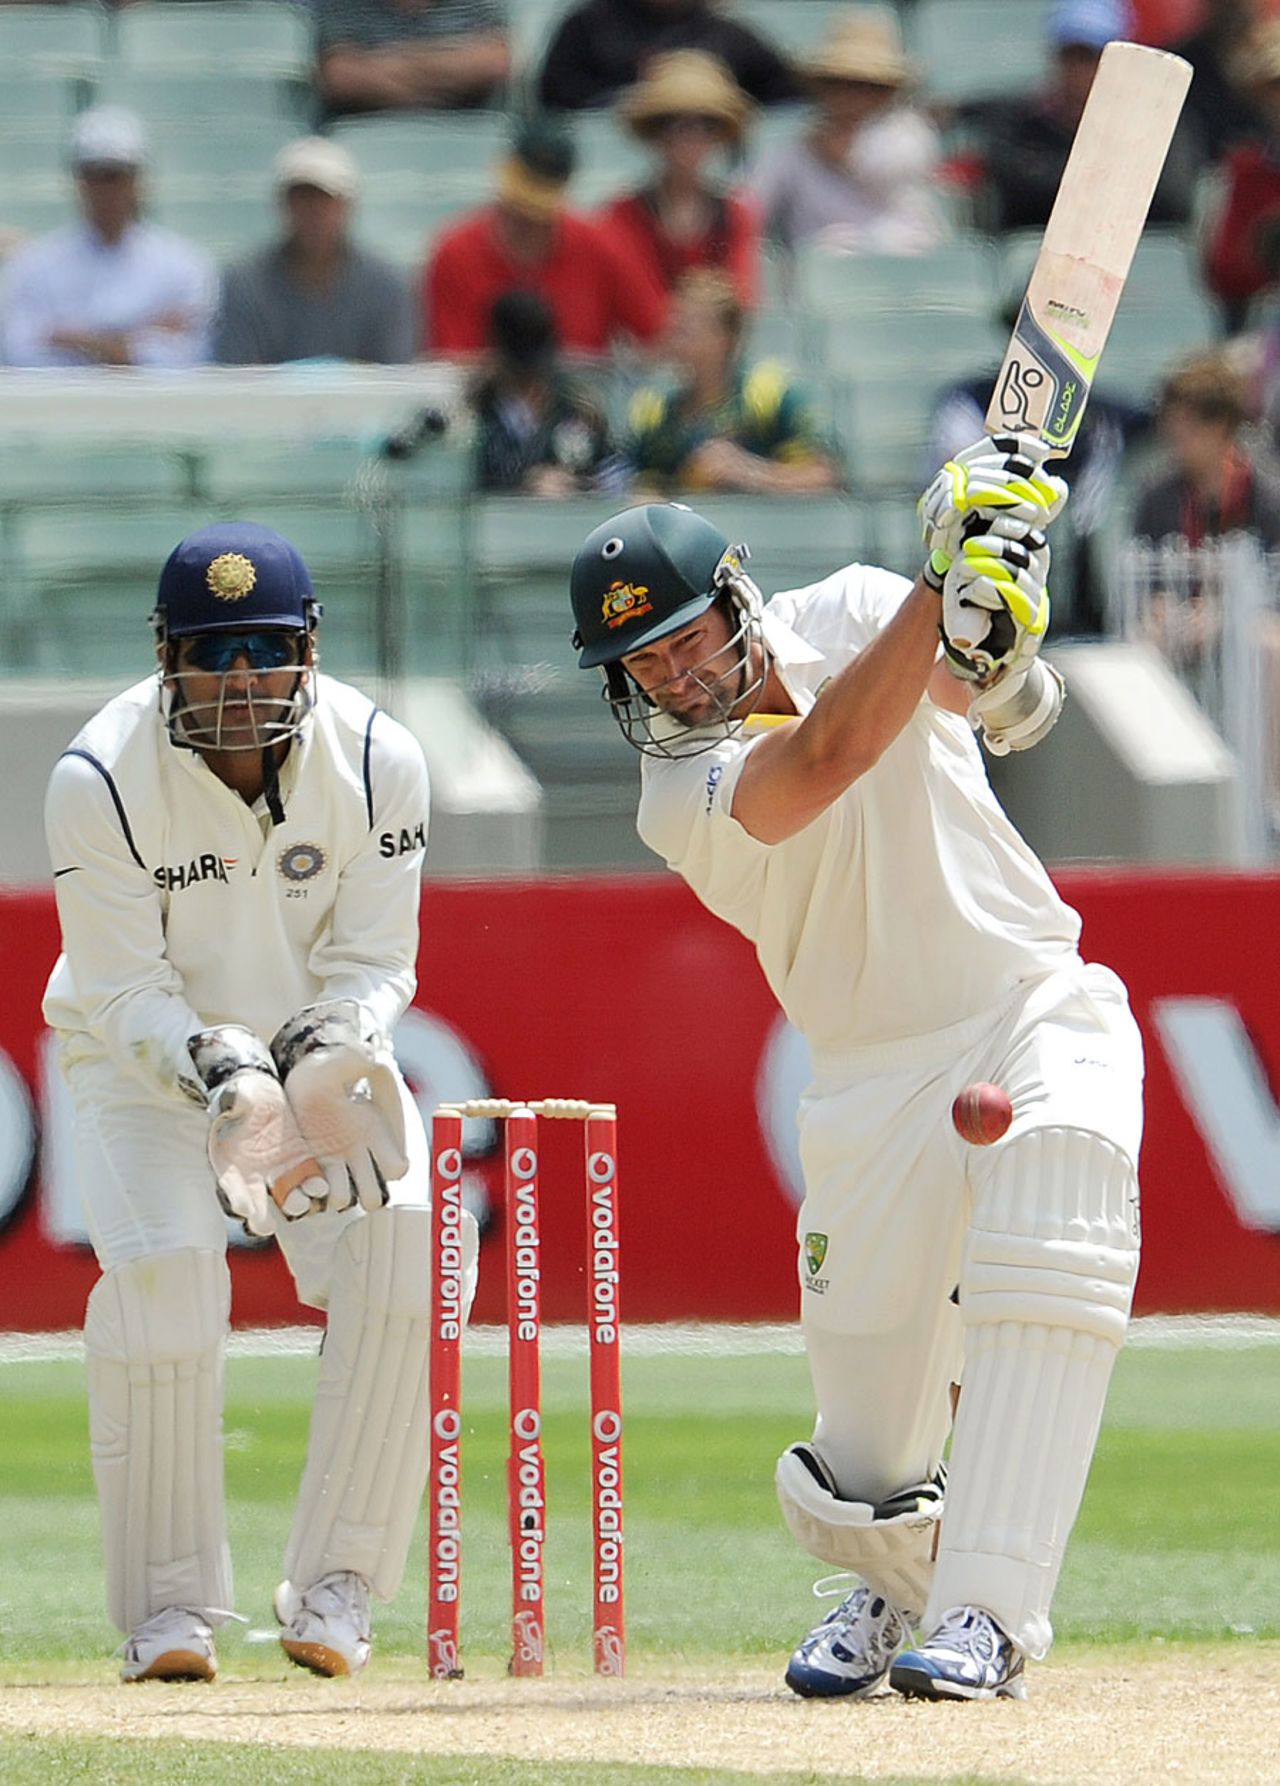 Ben Hilfenhaus frustrated India in a handy last-wicket stand, Australia v India, 1st Test, Melbourne, 4th day, December 29, 2011